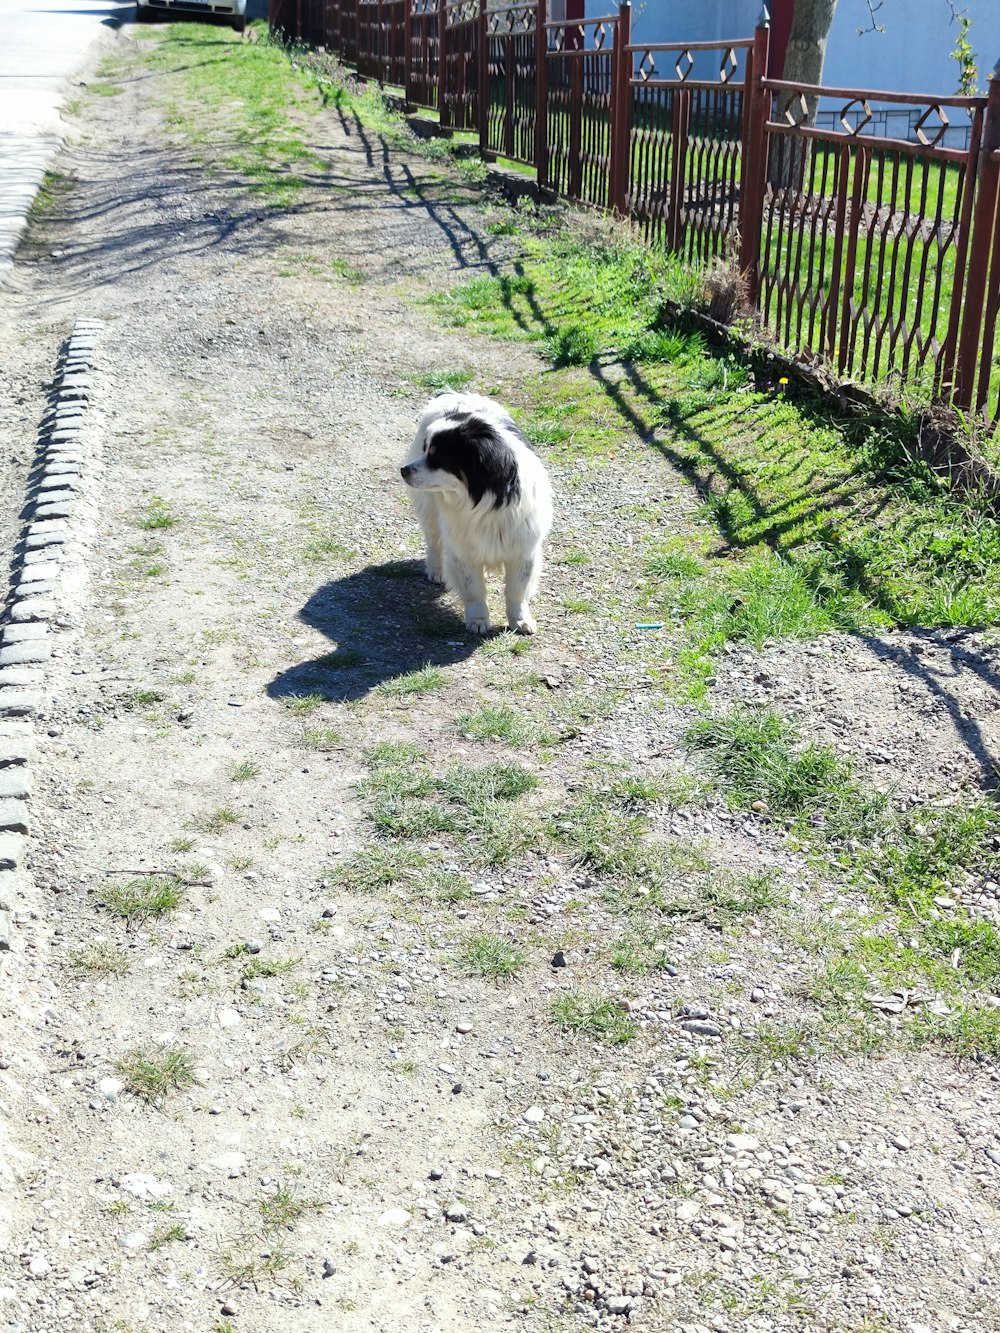 a black and white dog walking down a dirt road